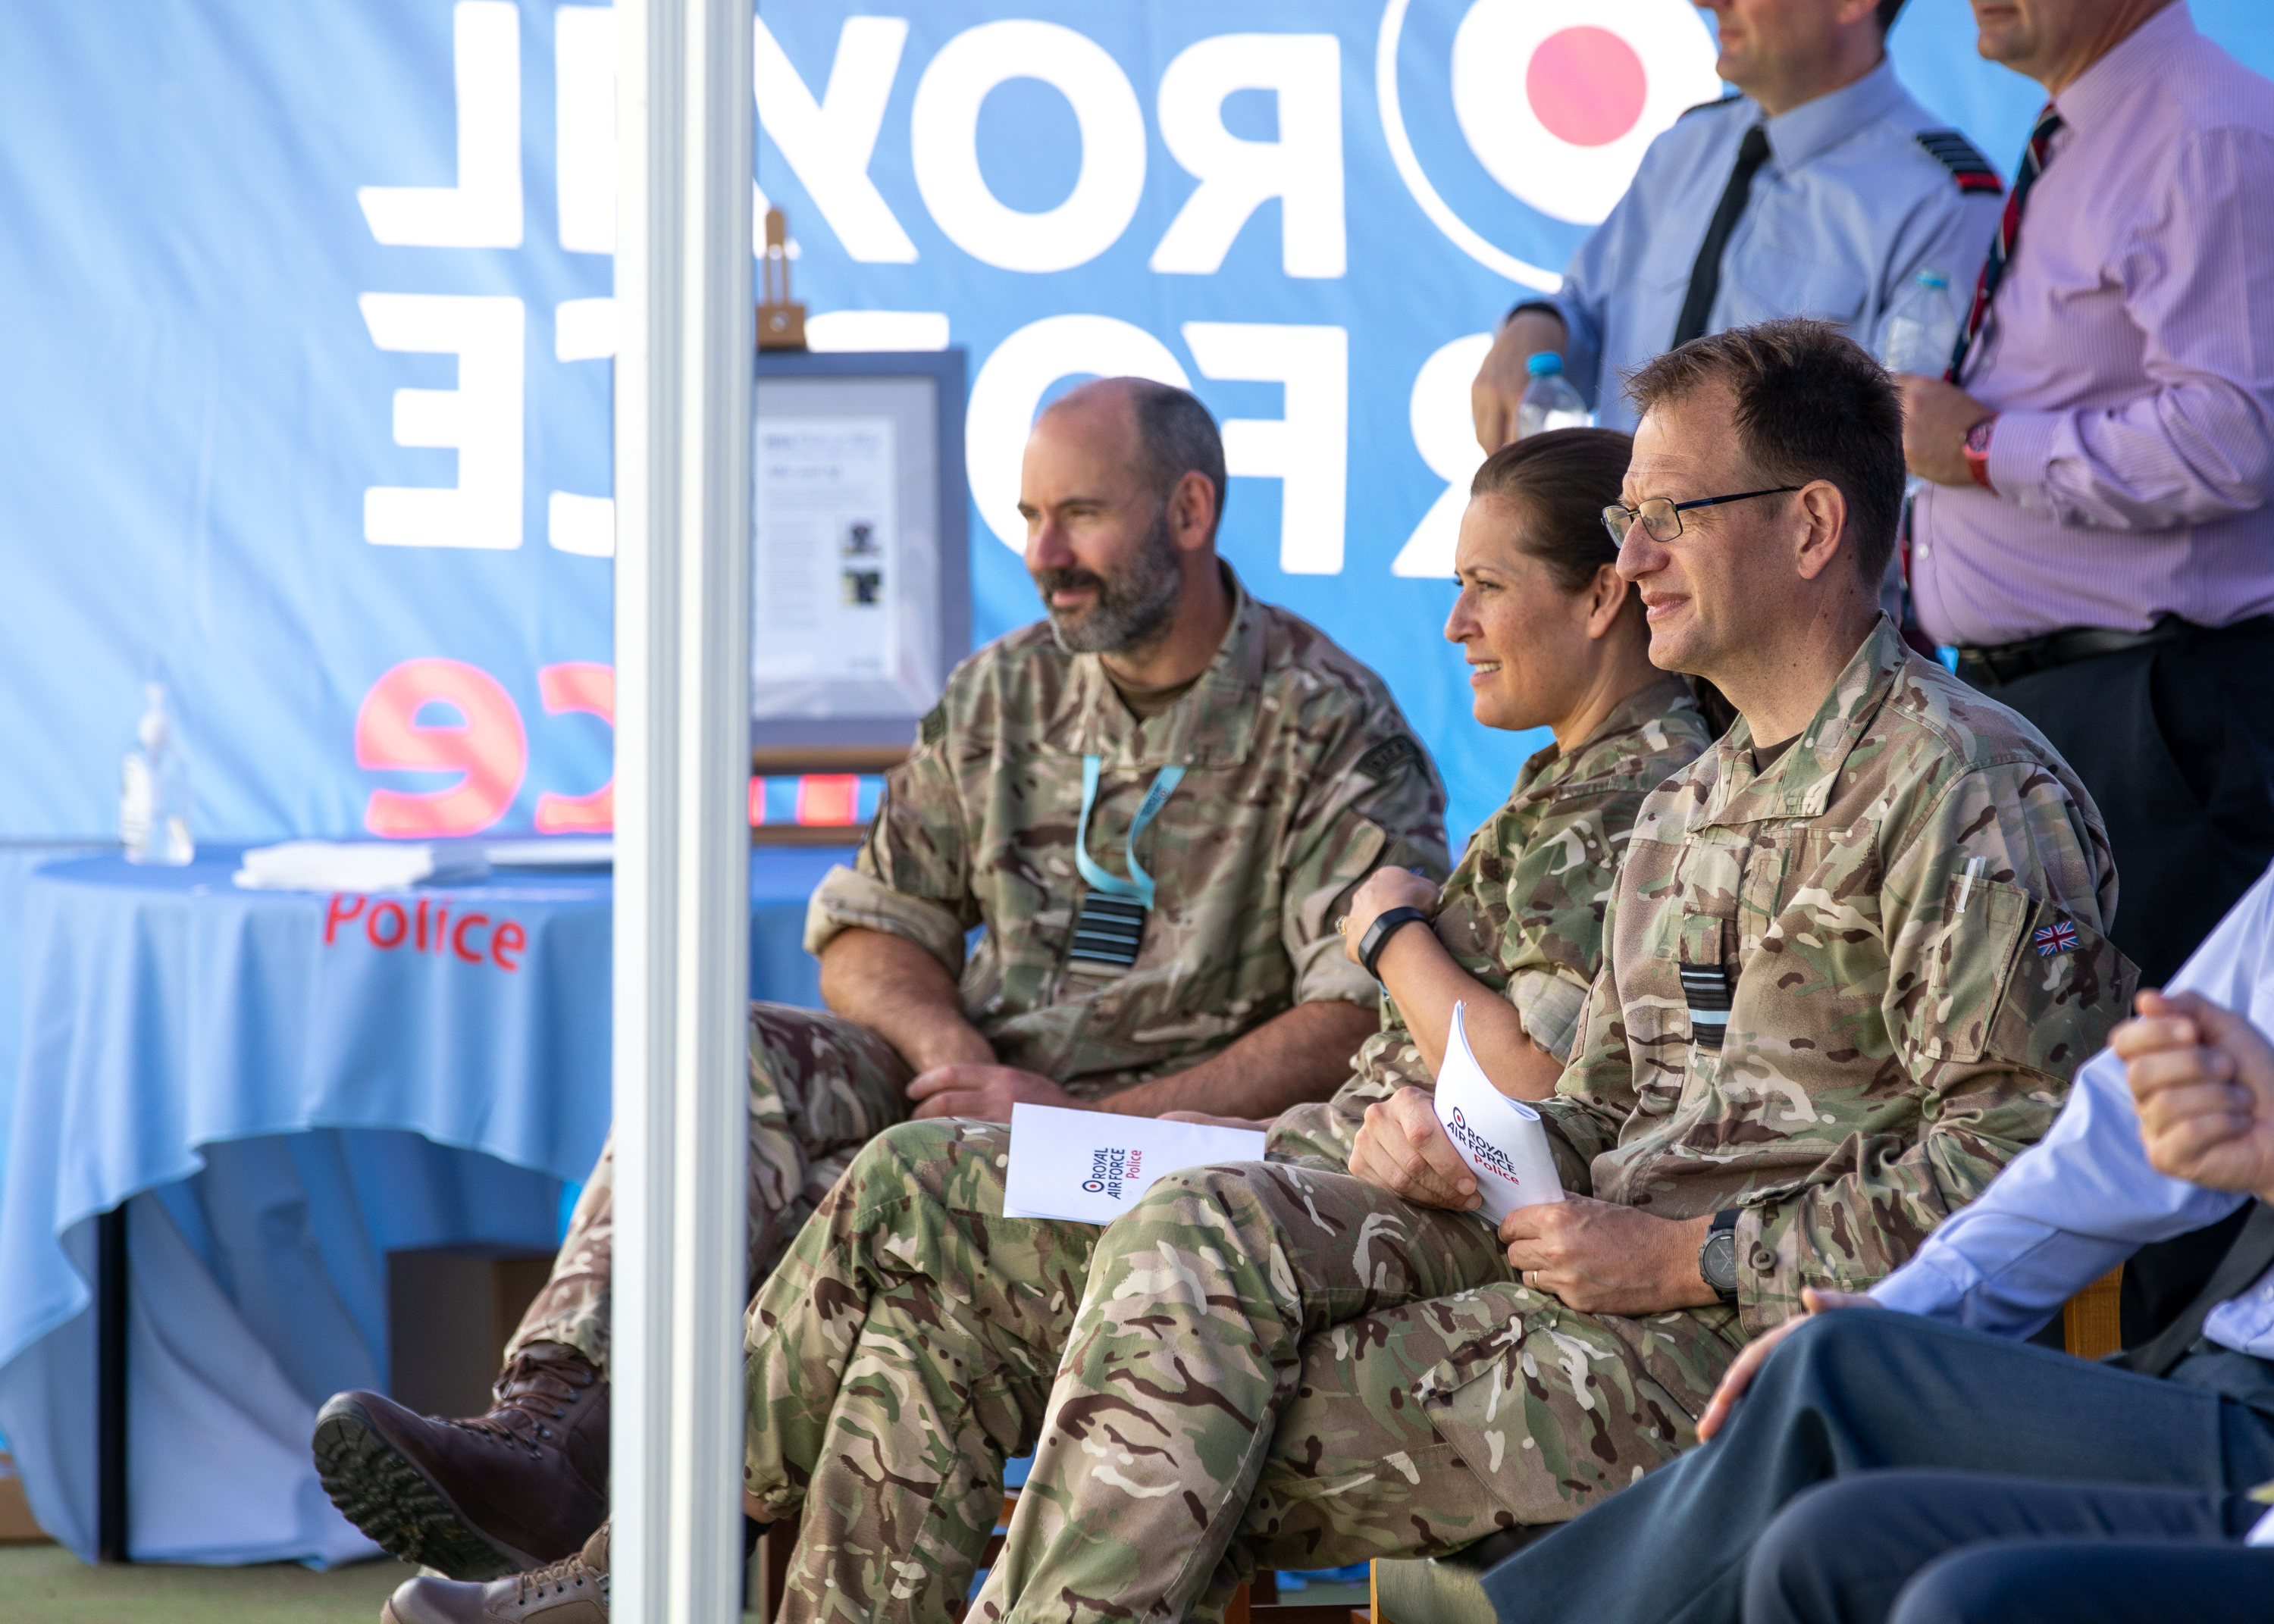 Station Commander, AOC 2 Gp (Des) and AOC 2 Gp watch the final of the Military Working Dog Trials 